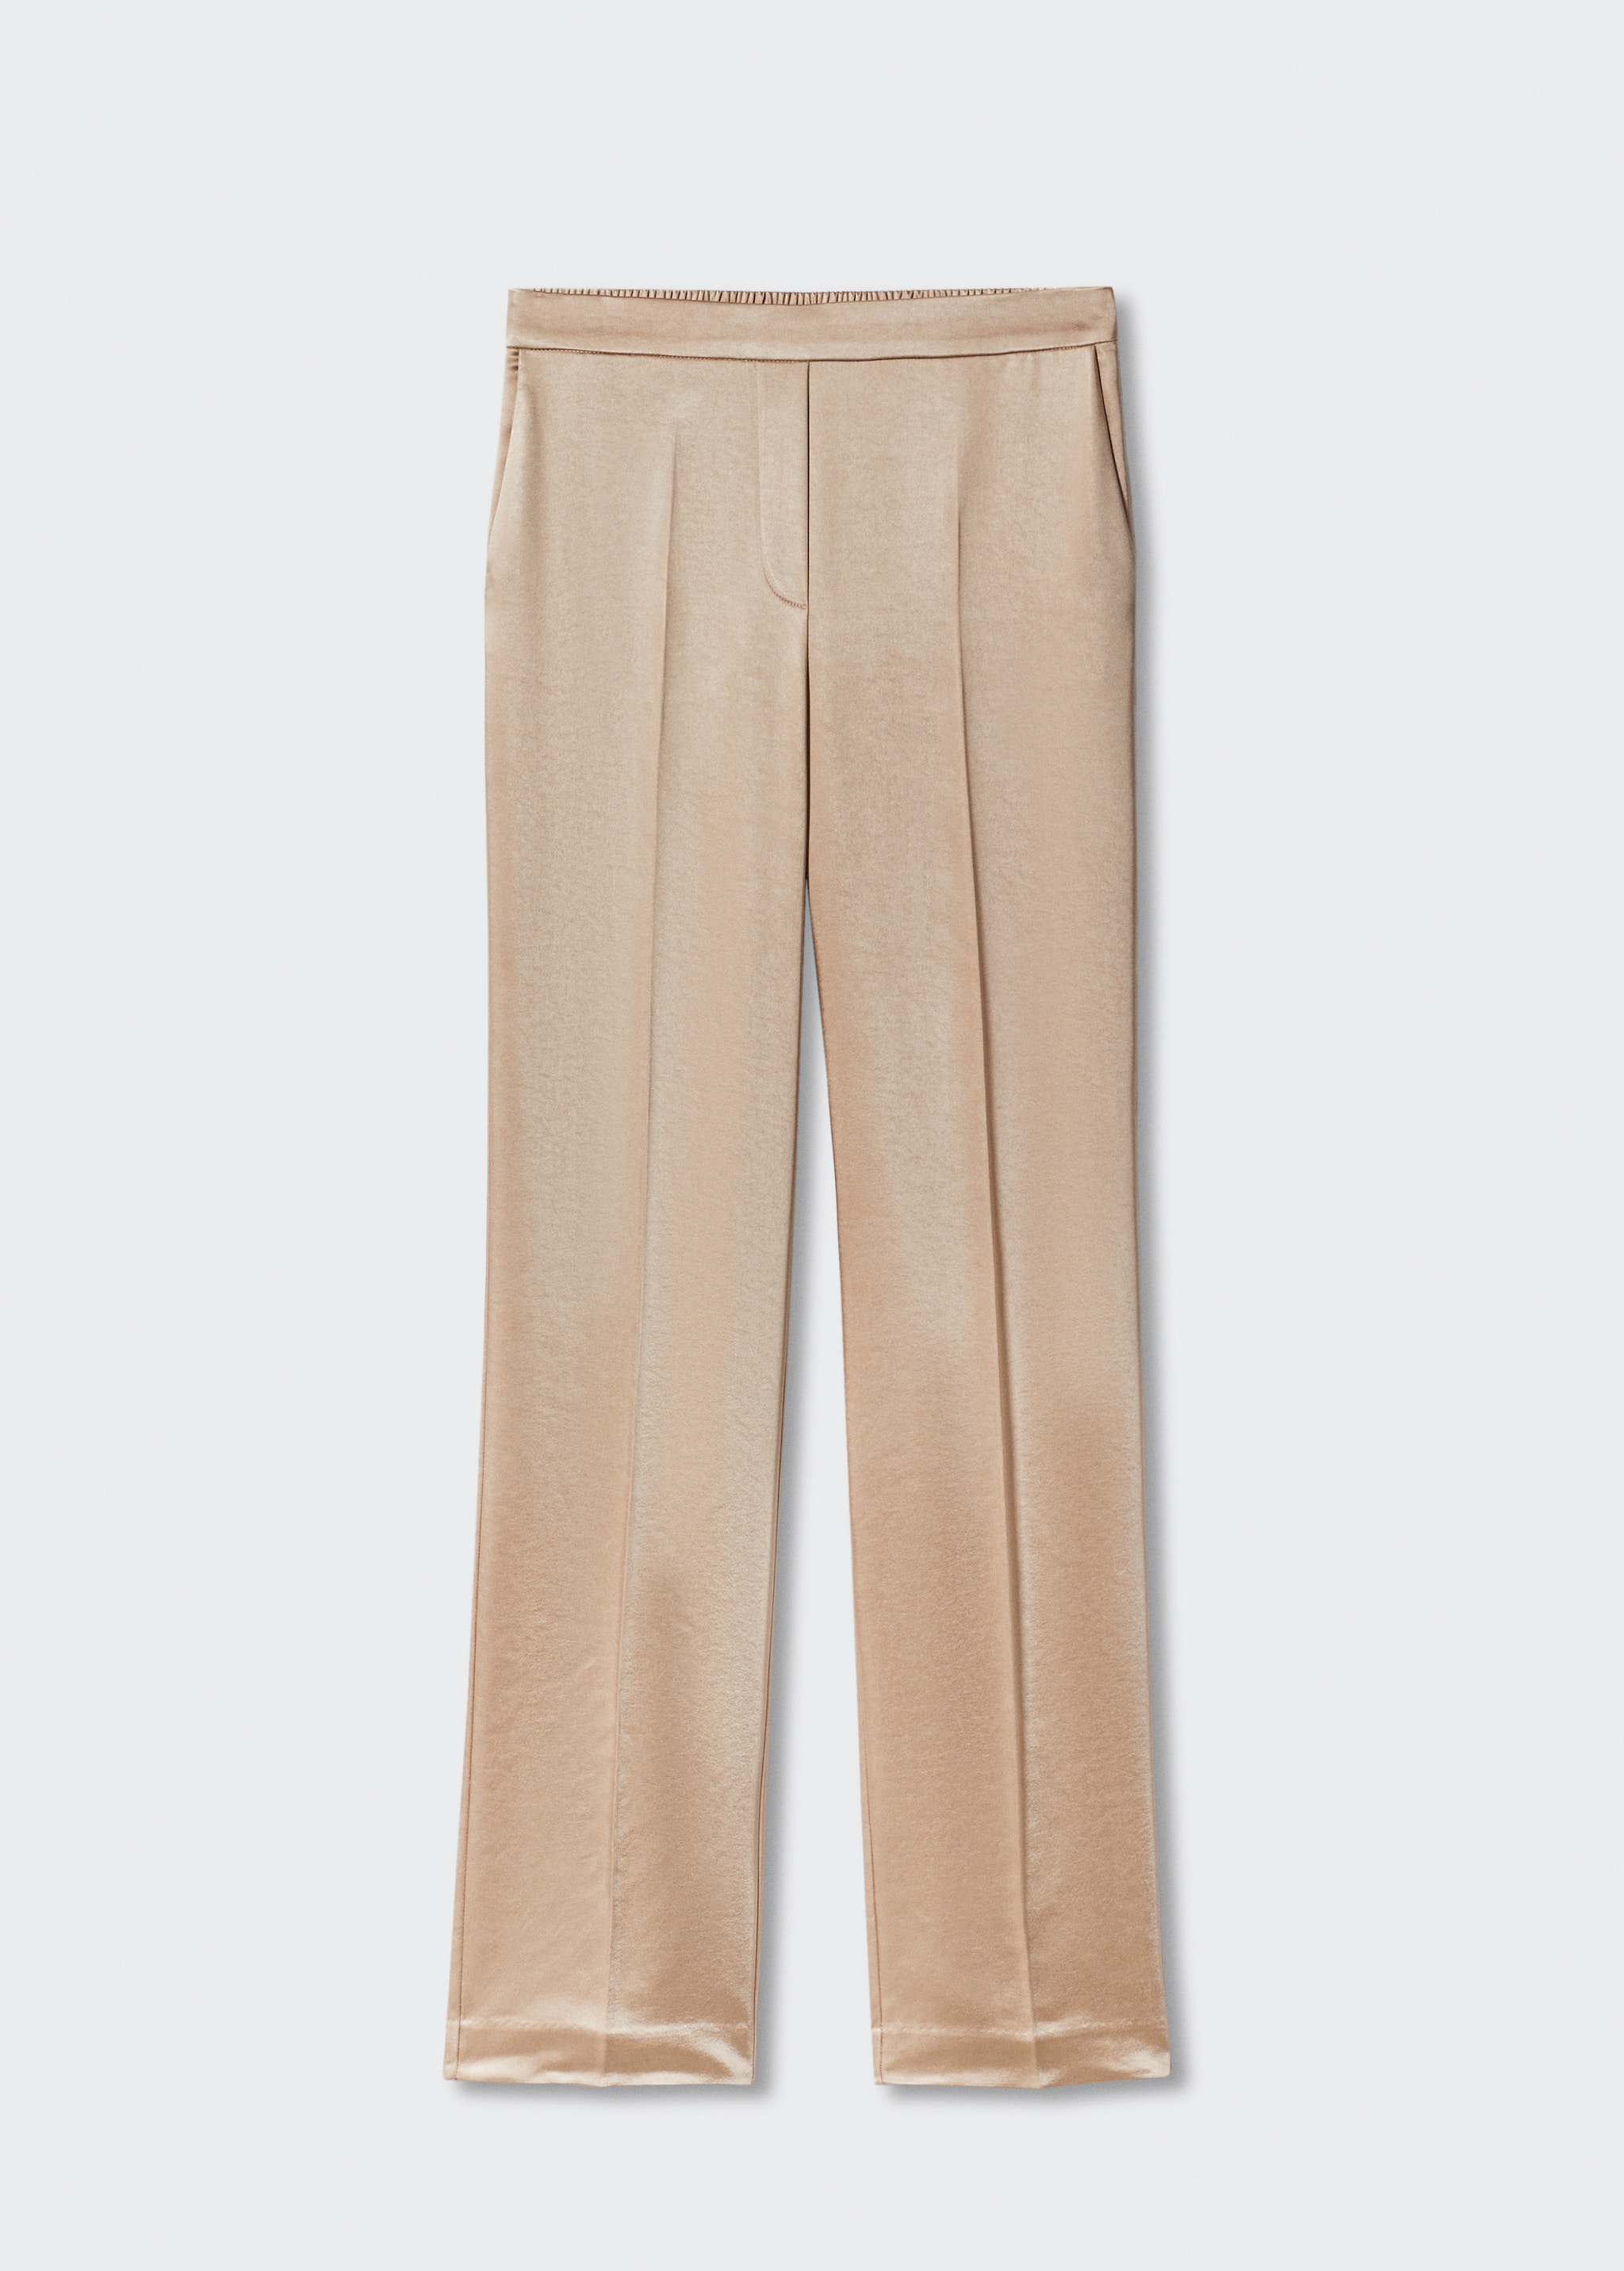 Satin trousers with elastic waist - Article without model